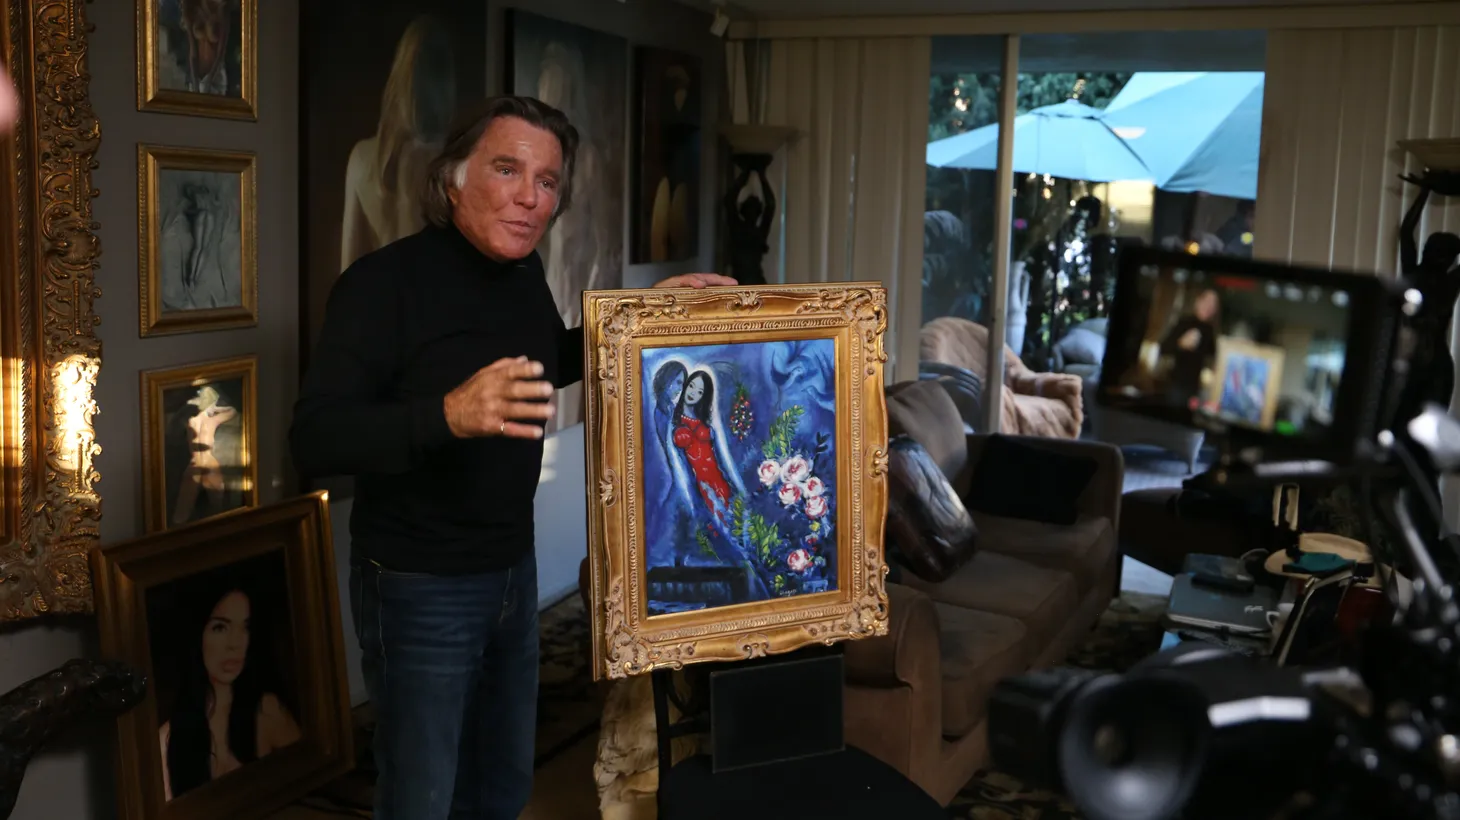 Tony Tetro has made thousands of high-quality forgeries of famous artists' work. He poses here with a Chagall imitation entitled “Fernanda and Me.”